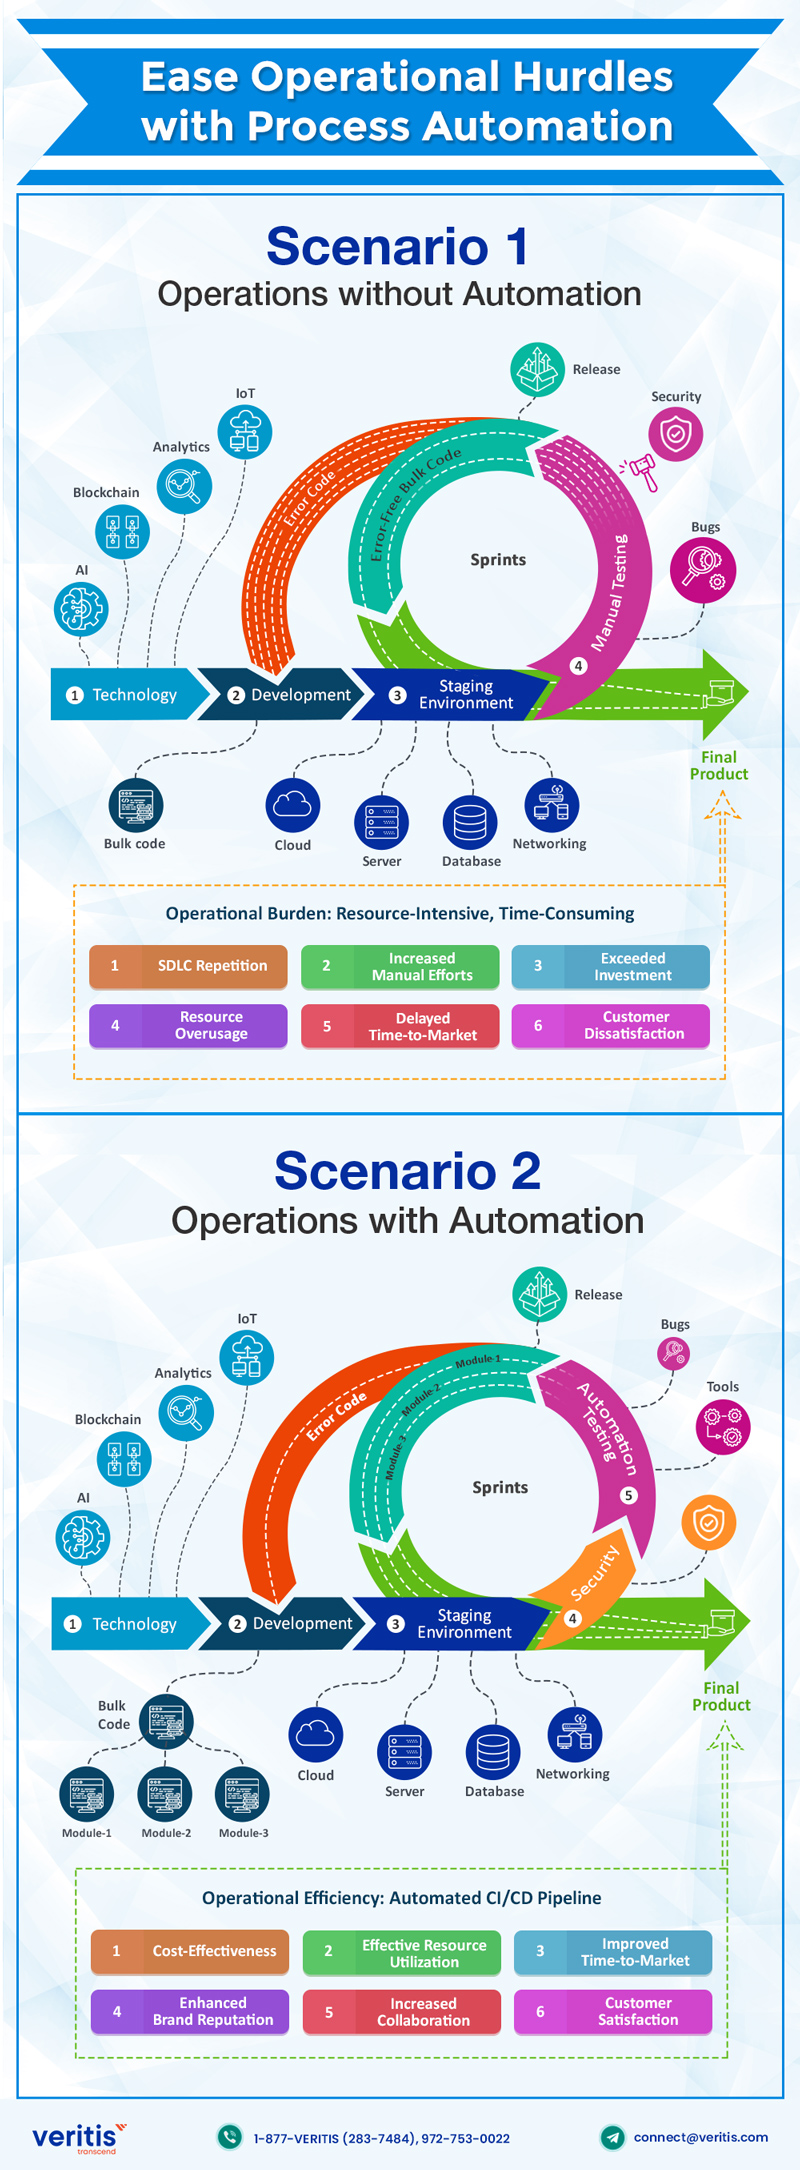 Ease IT Operational Hurdles with Process Automation IT Infographic